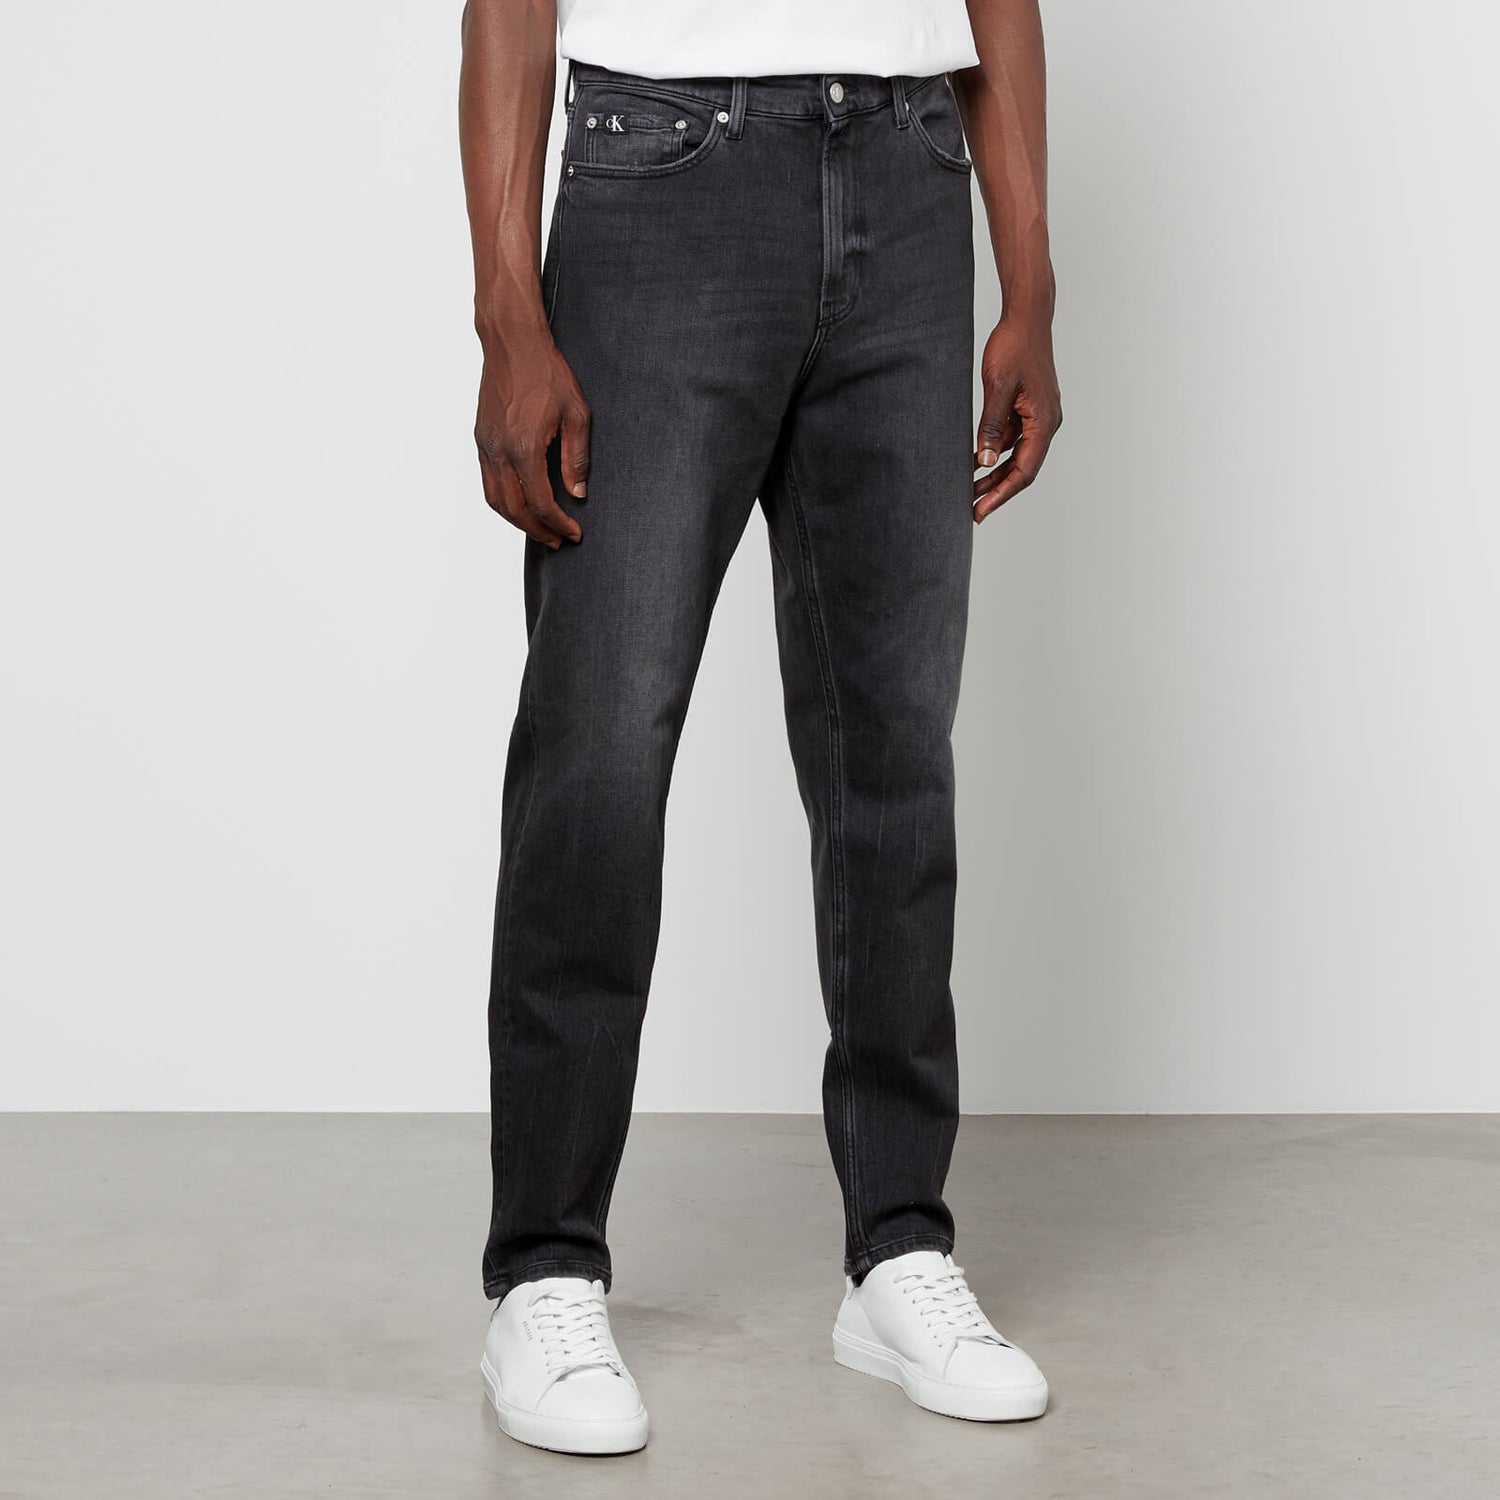 Calvin Klein Jeans Tapered Jeans - W30/L32